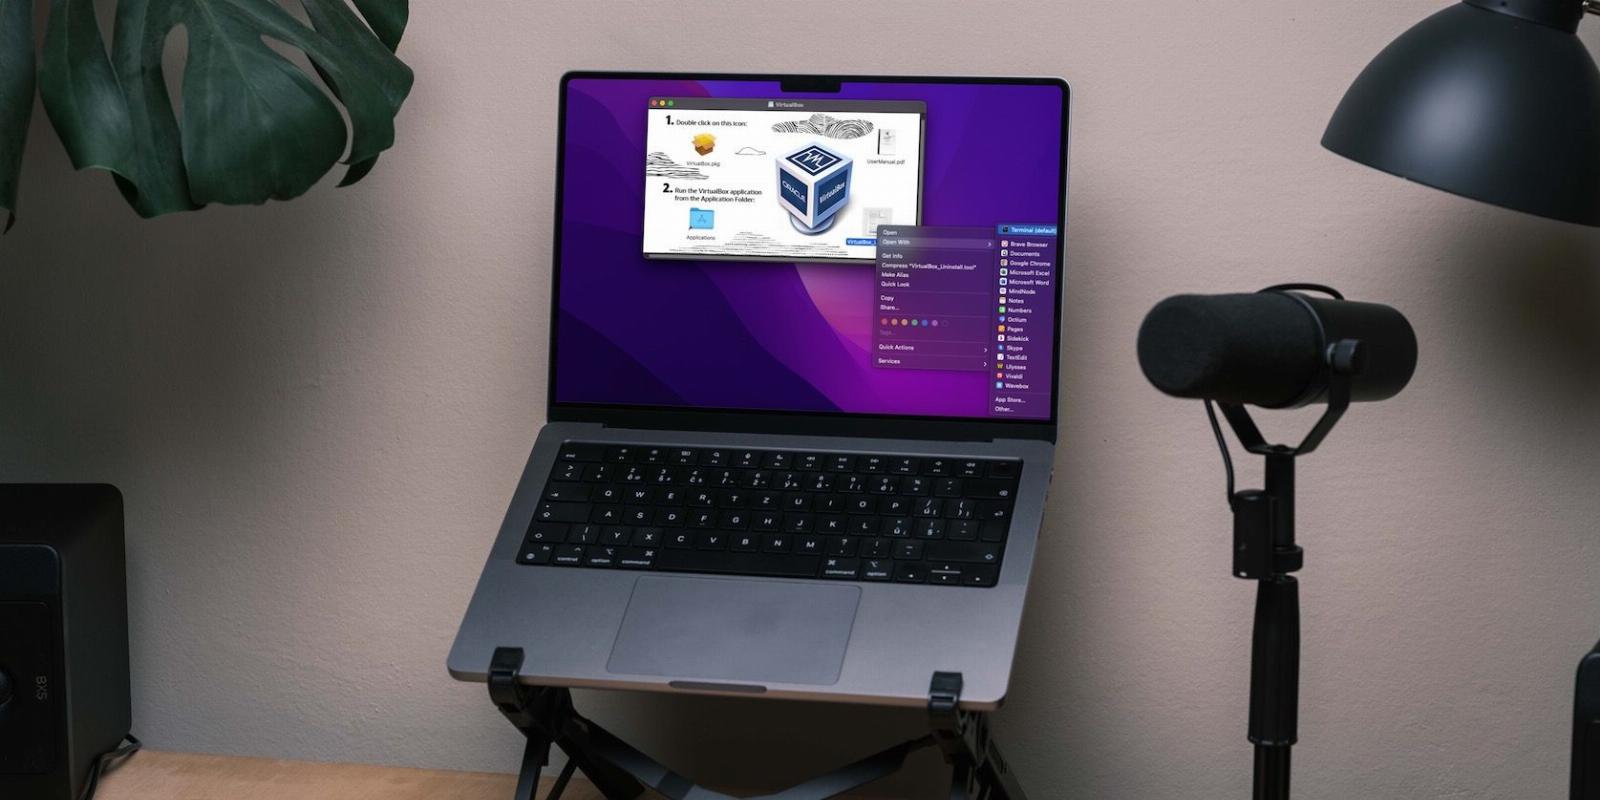 How to Safely Uninstall VirtualBox From a Mac